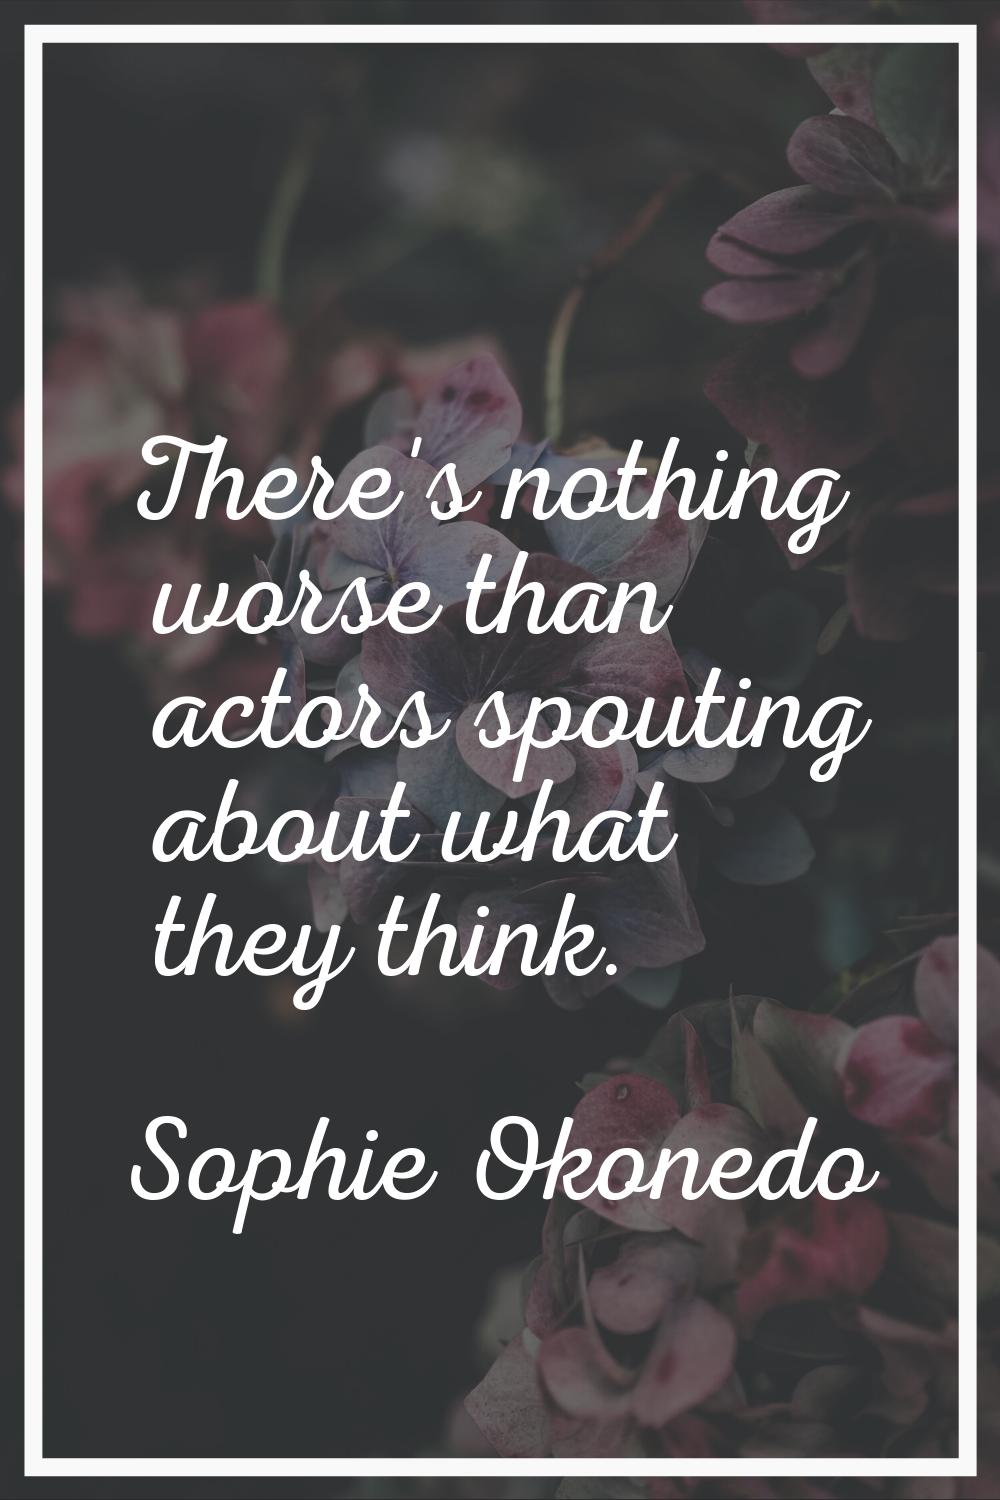 There's nothing worse than actors spouting about what they think.